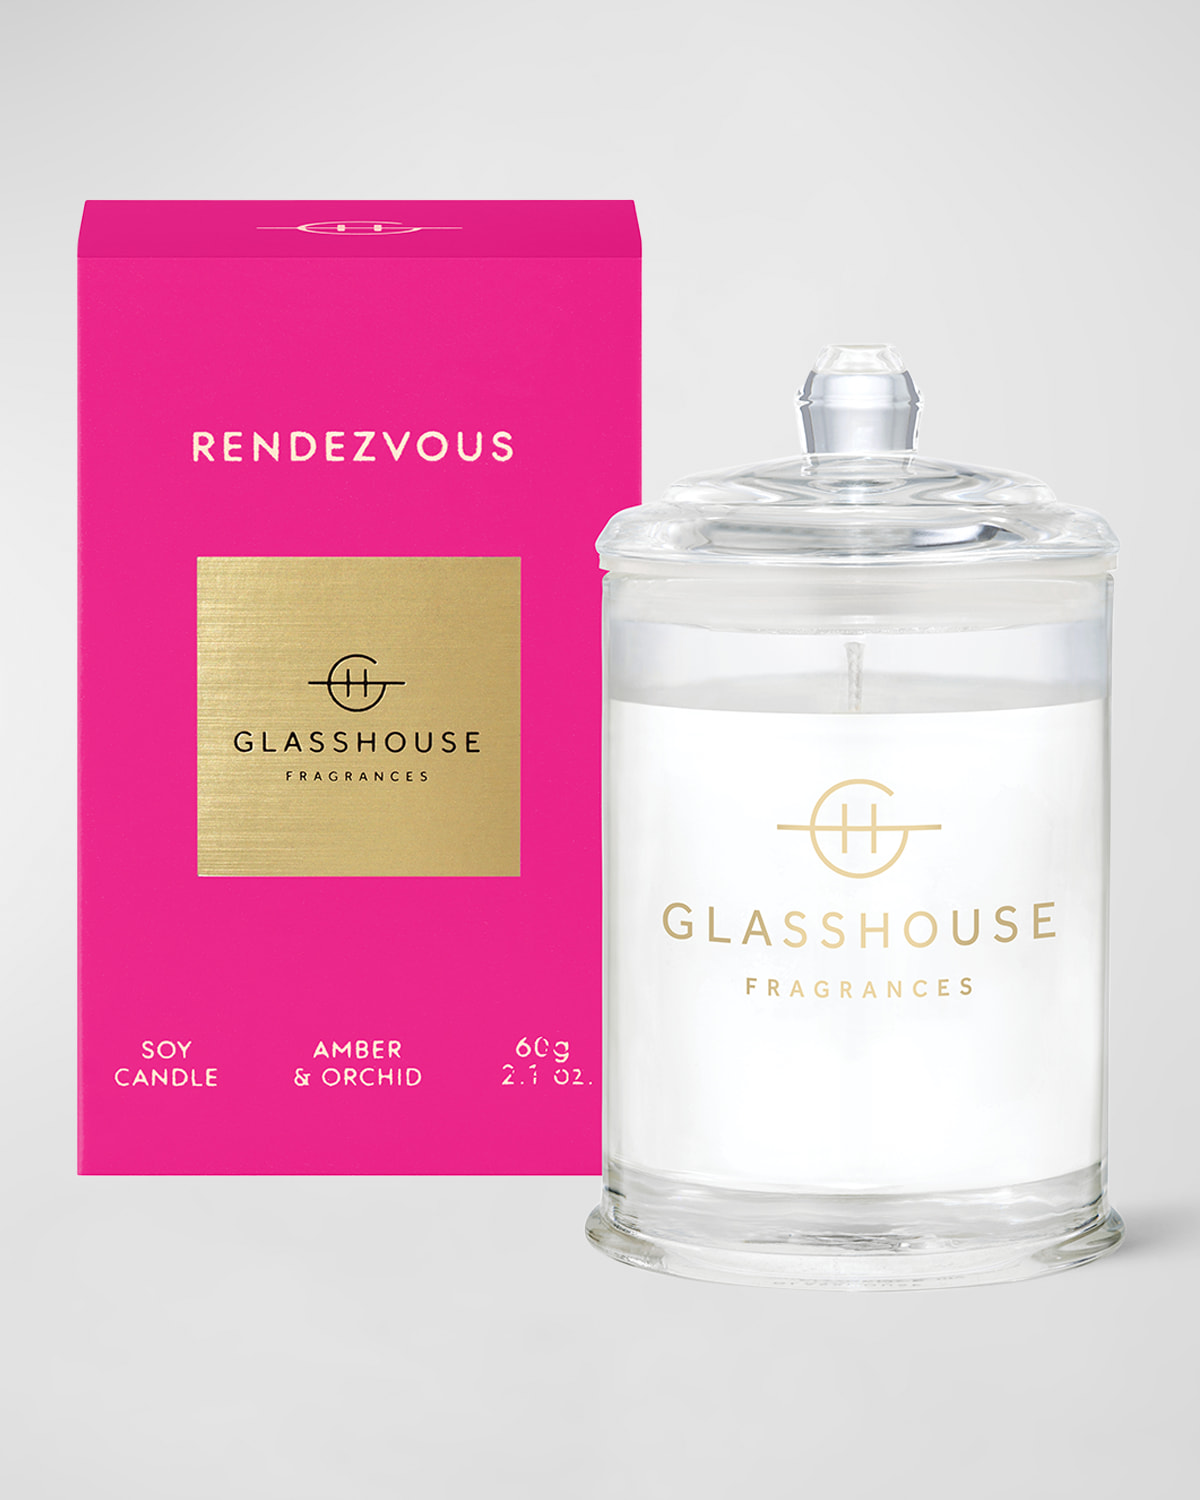 Glasshouse Fragrances 2.1 Oz. Rendezvous Scented Candle